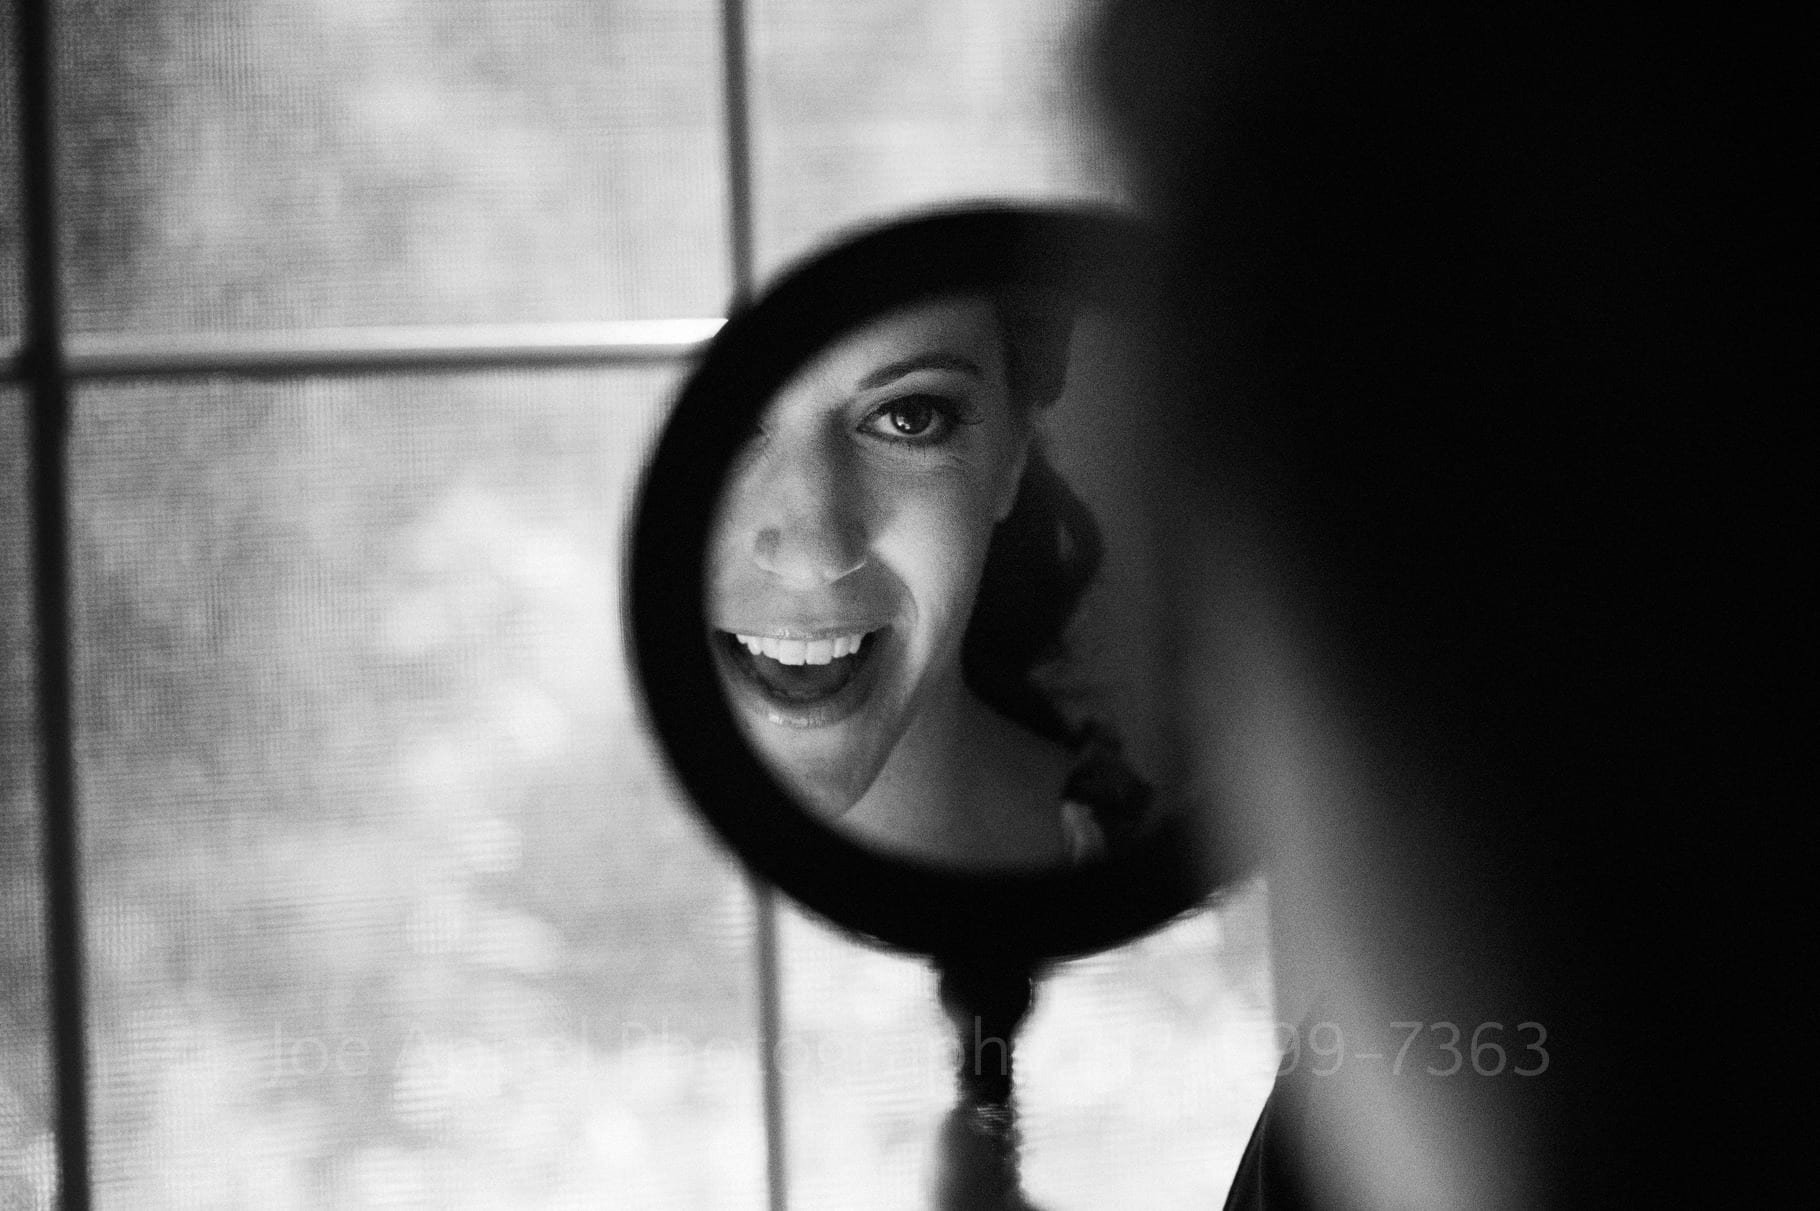 A woman grins as she looks at her reflection in a round mirror in front of a window